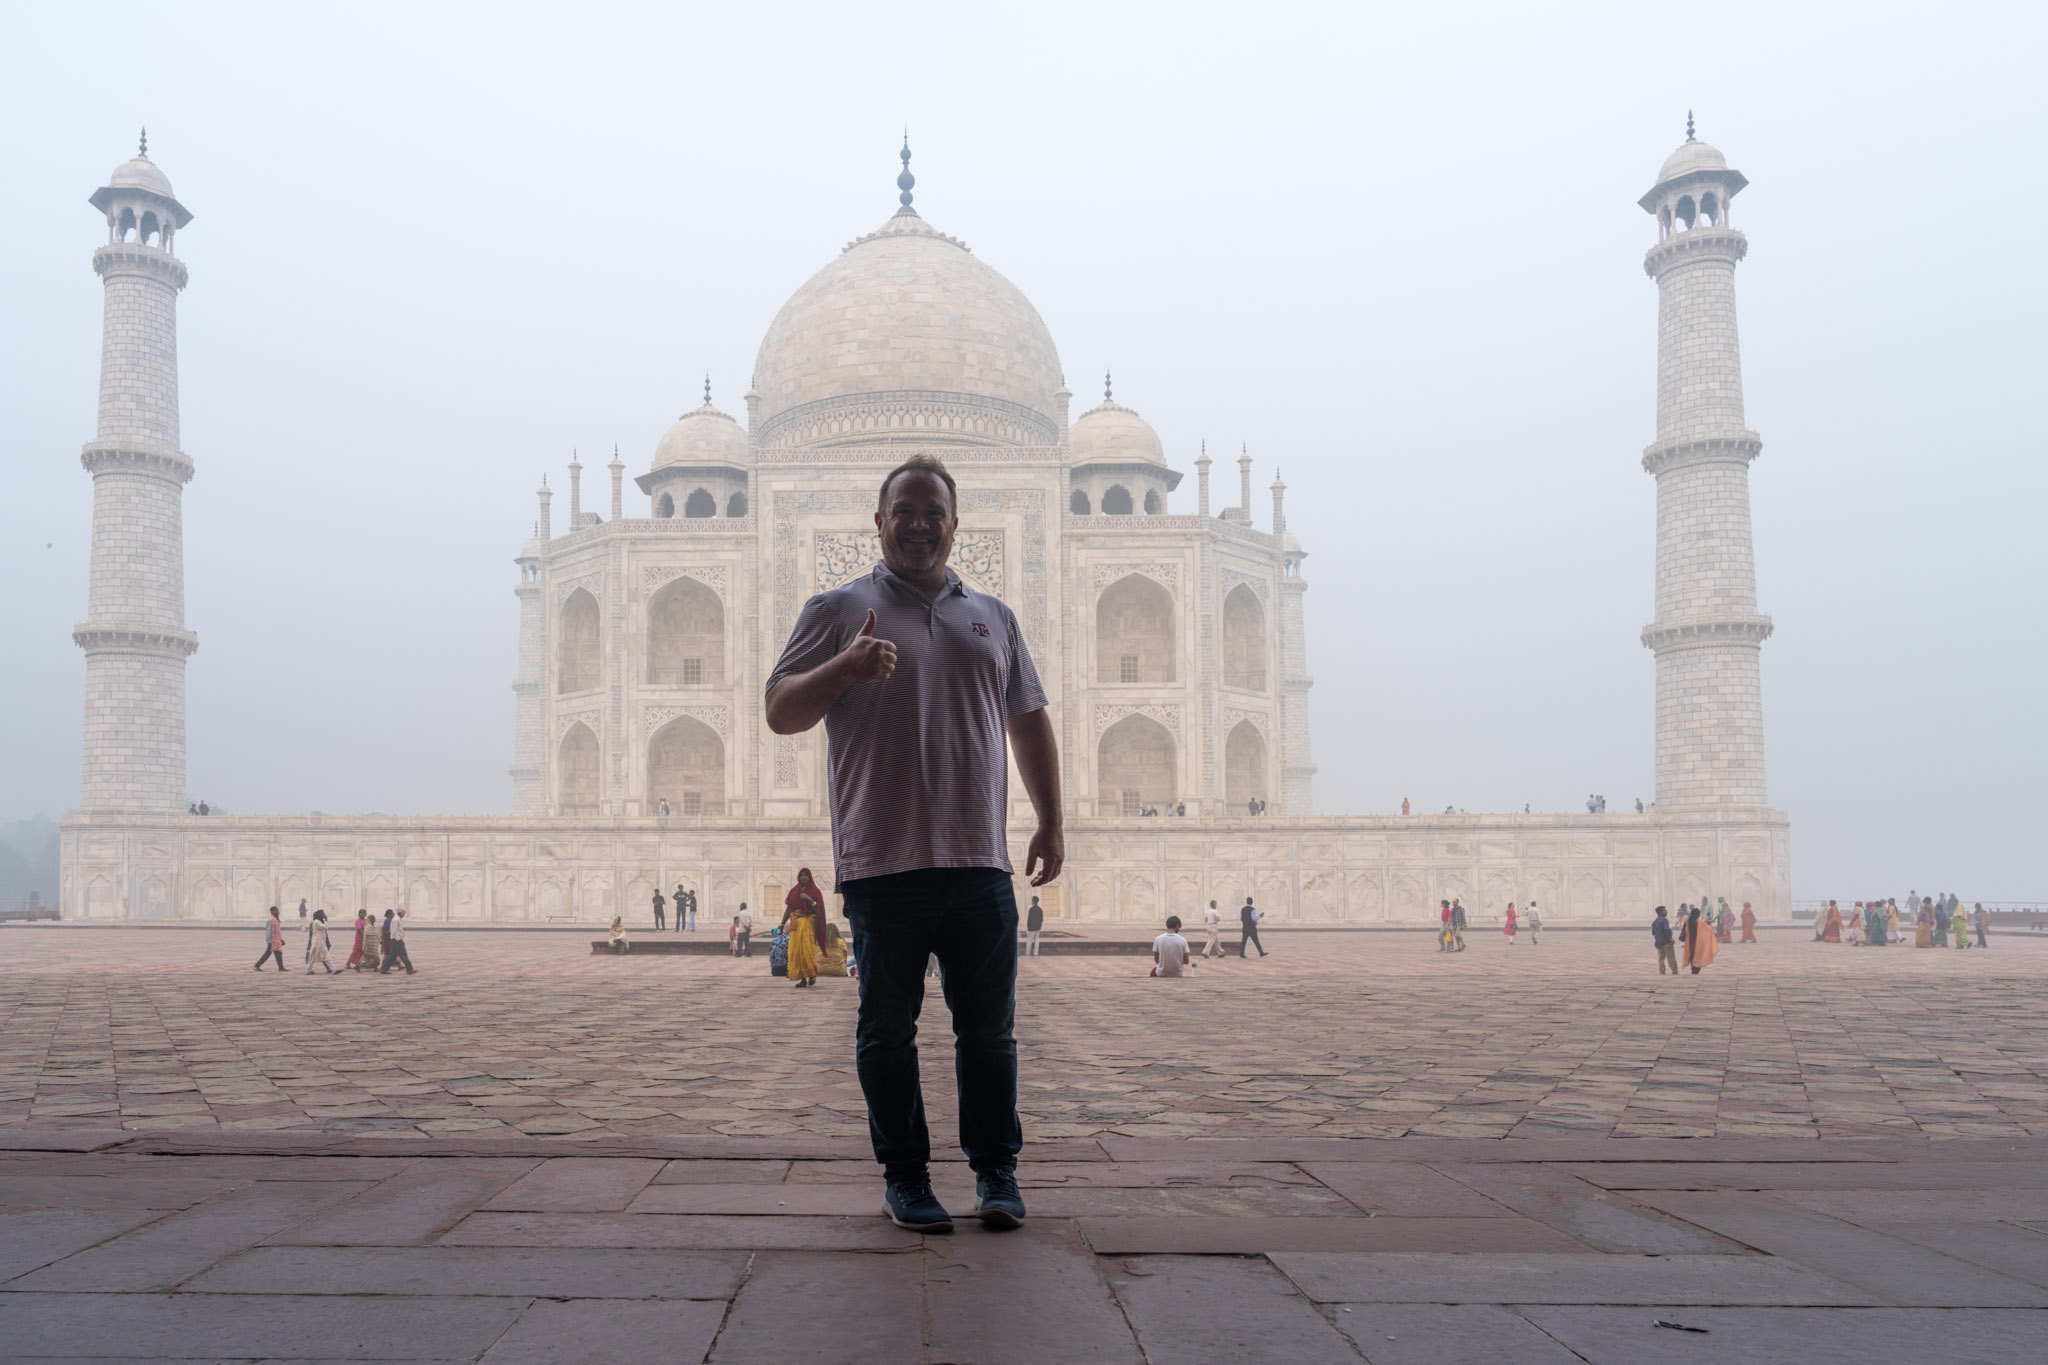 a man standing in front of a large building with Taj Mahal in the background